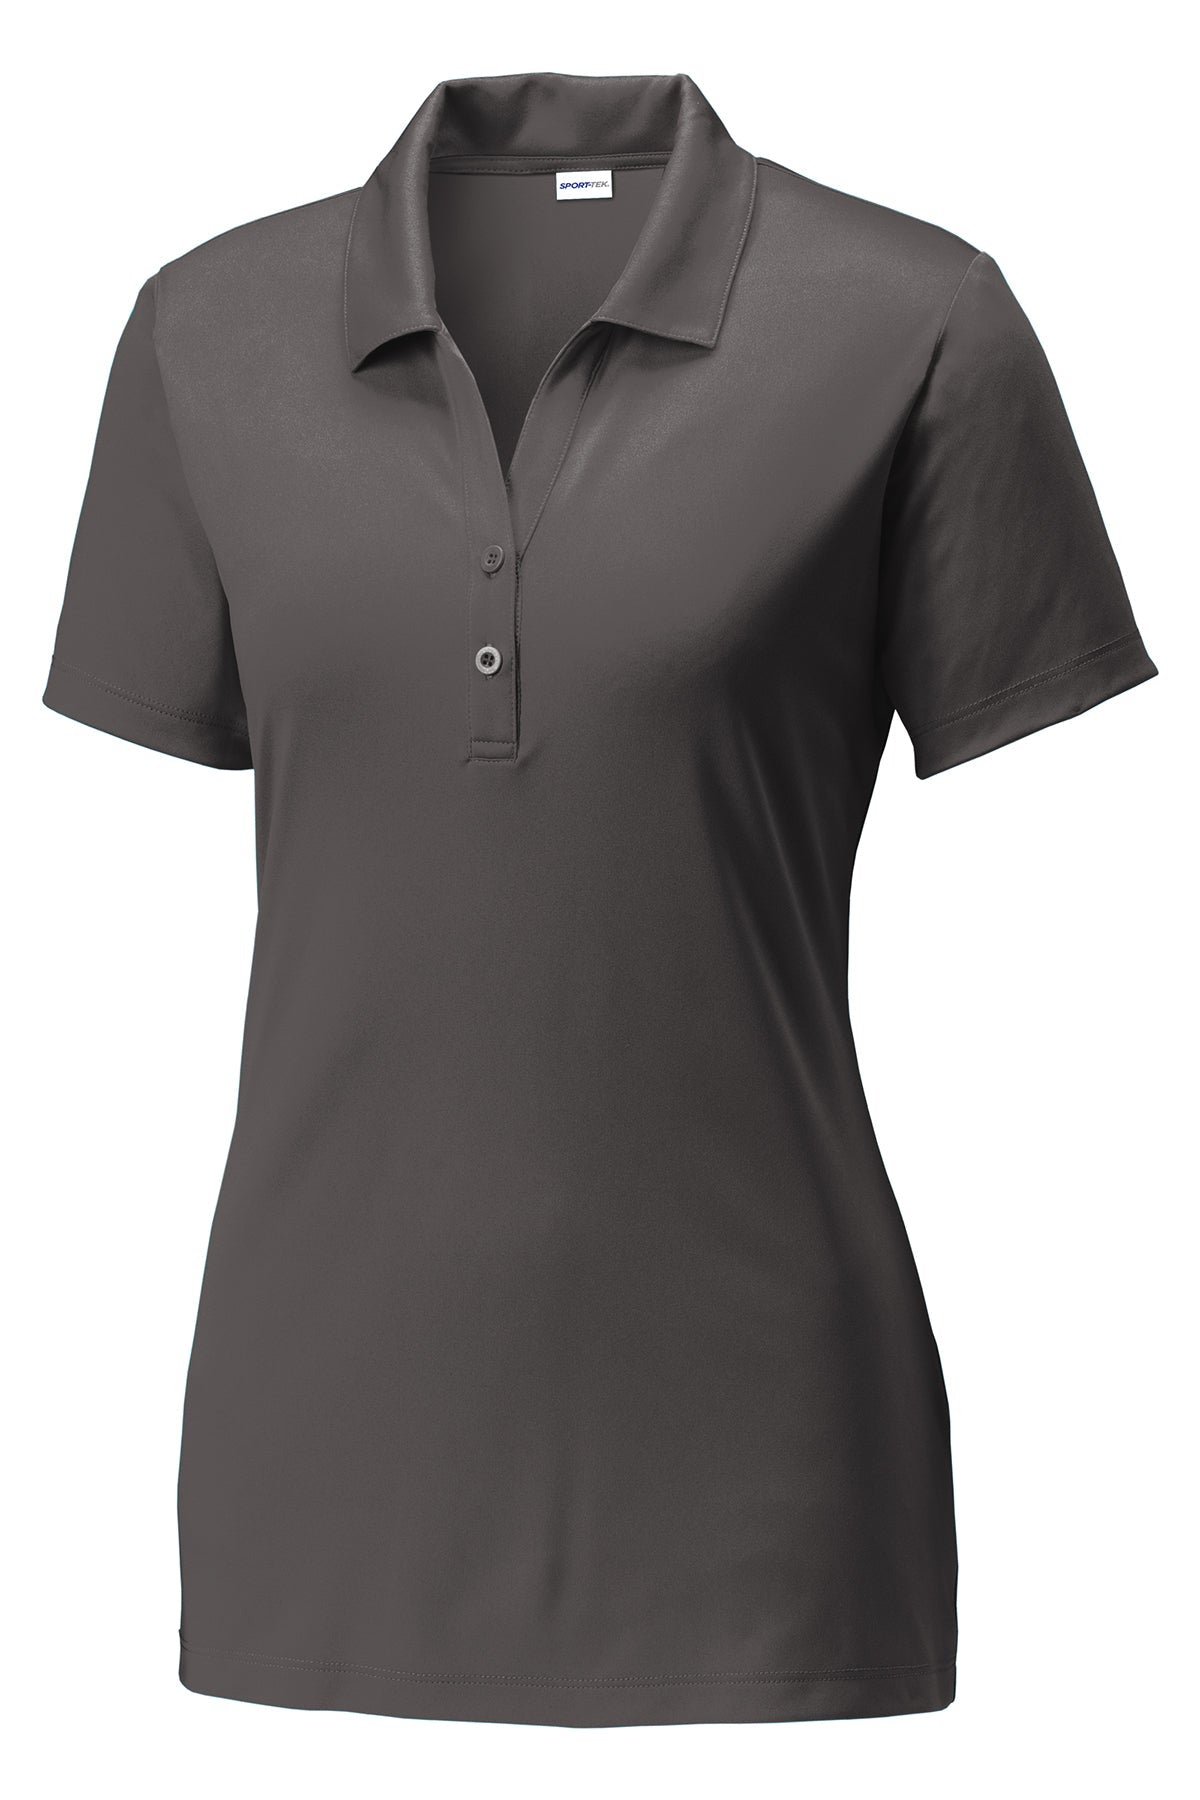 LST550 Sport-Tek ® Ladies PosiCharge ® Competitor ™ Polo  XS-4XL